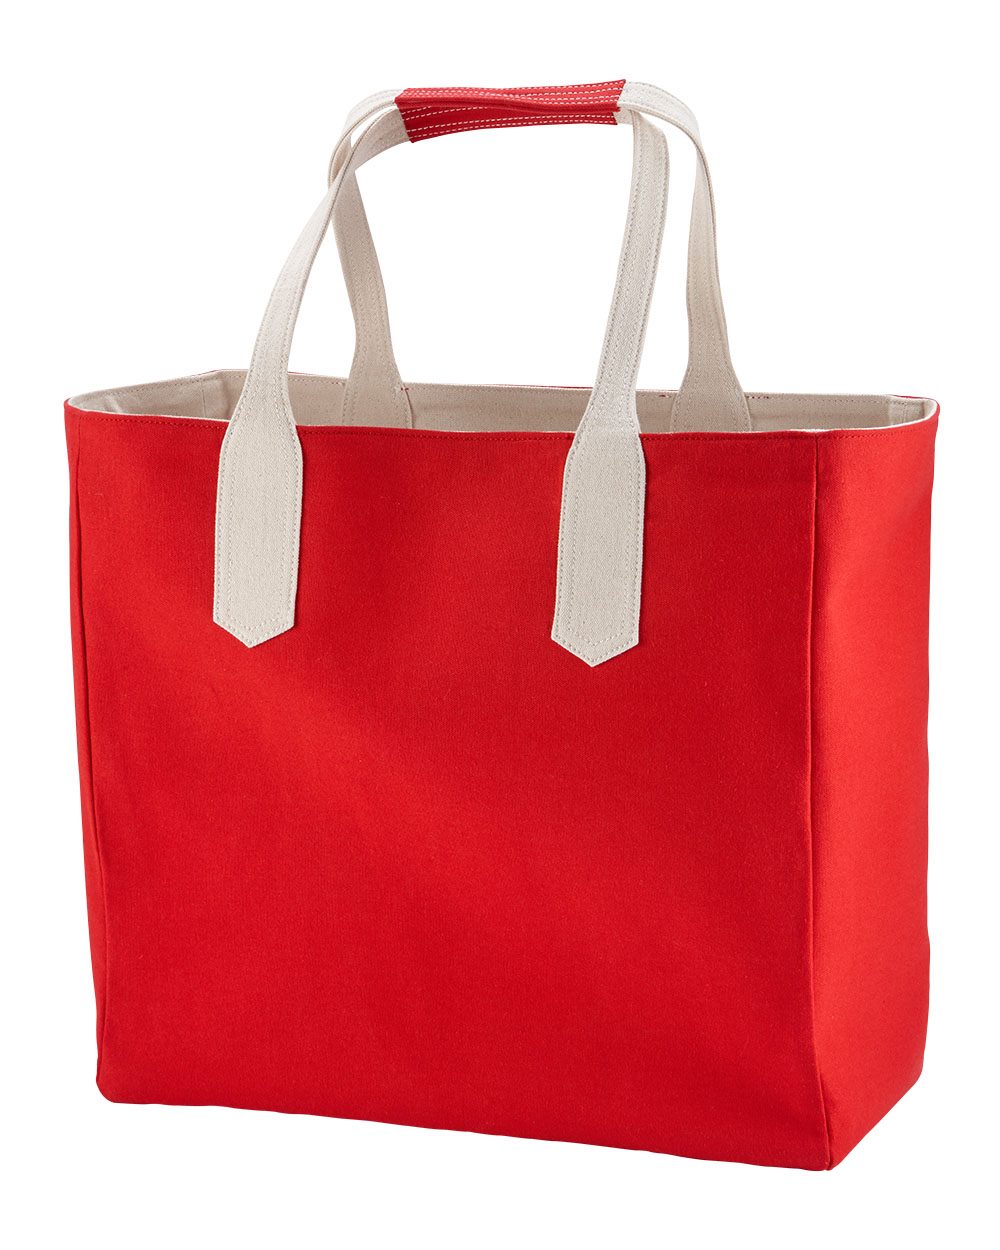 Brookson Bay BB500 - Solid Tote with Contrast Handles